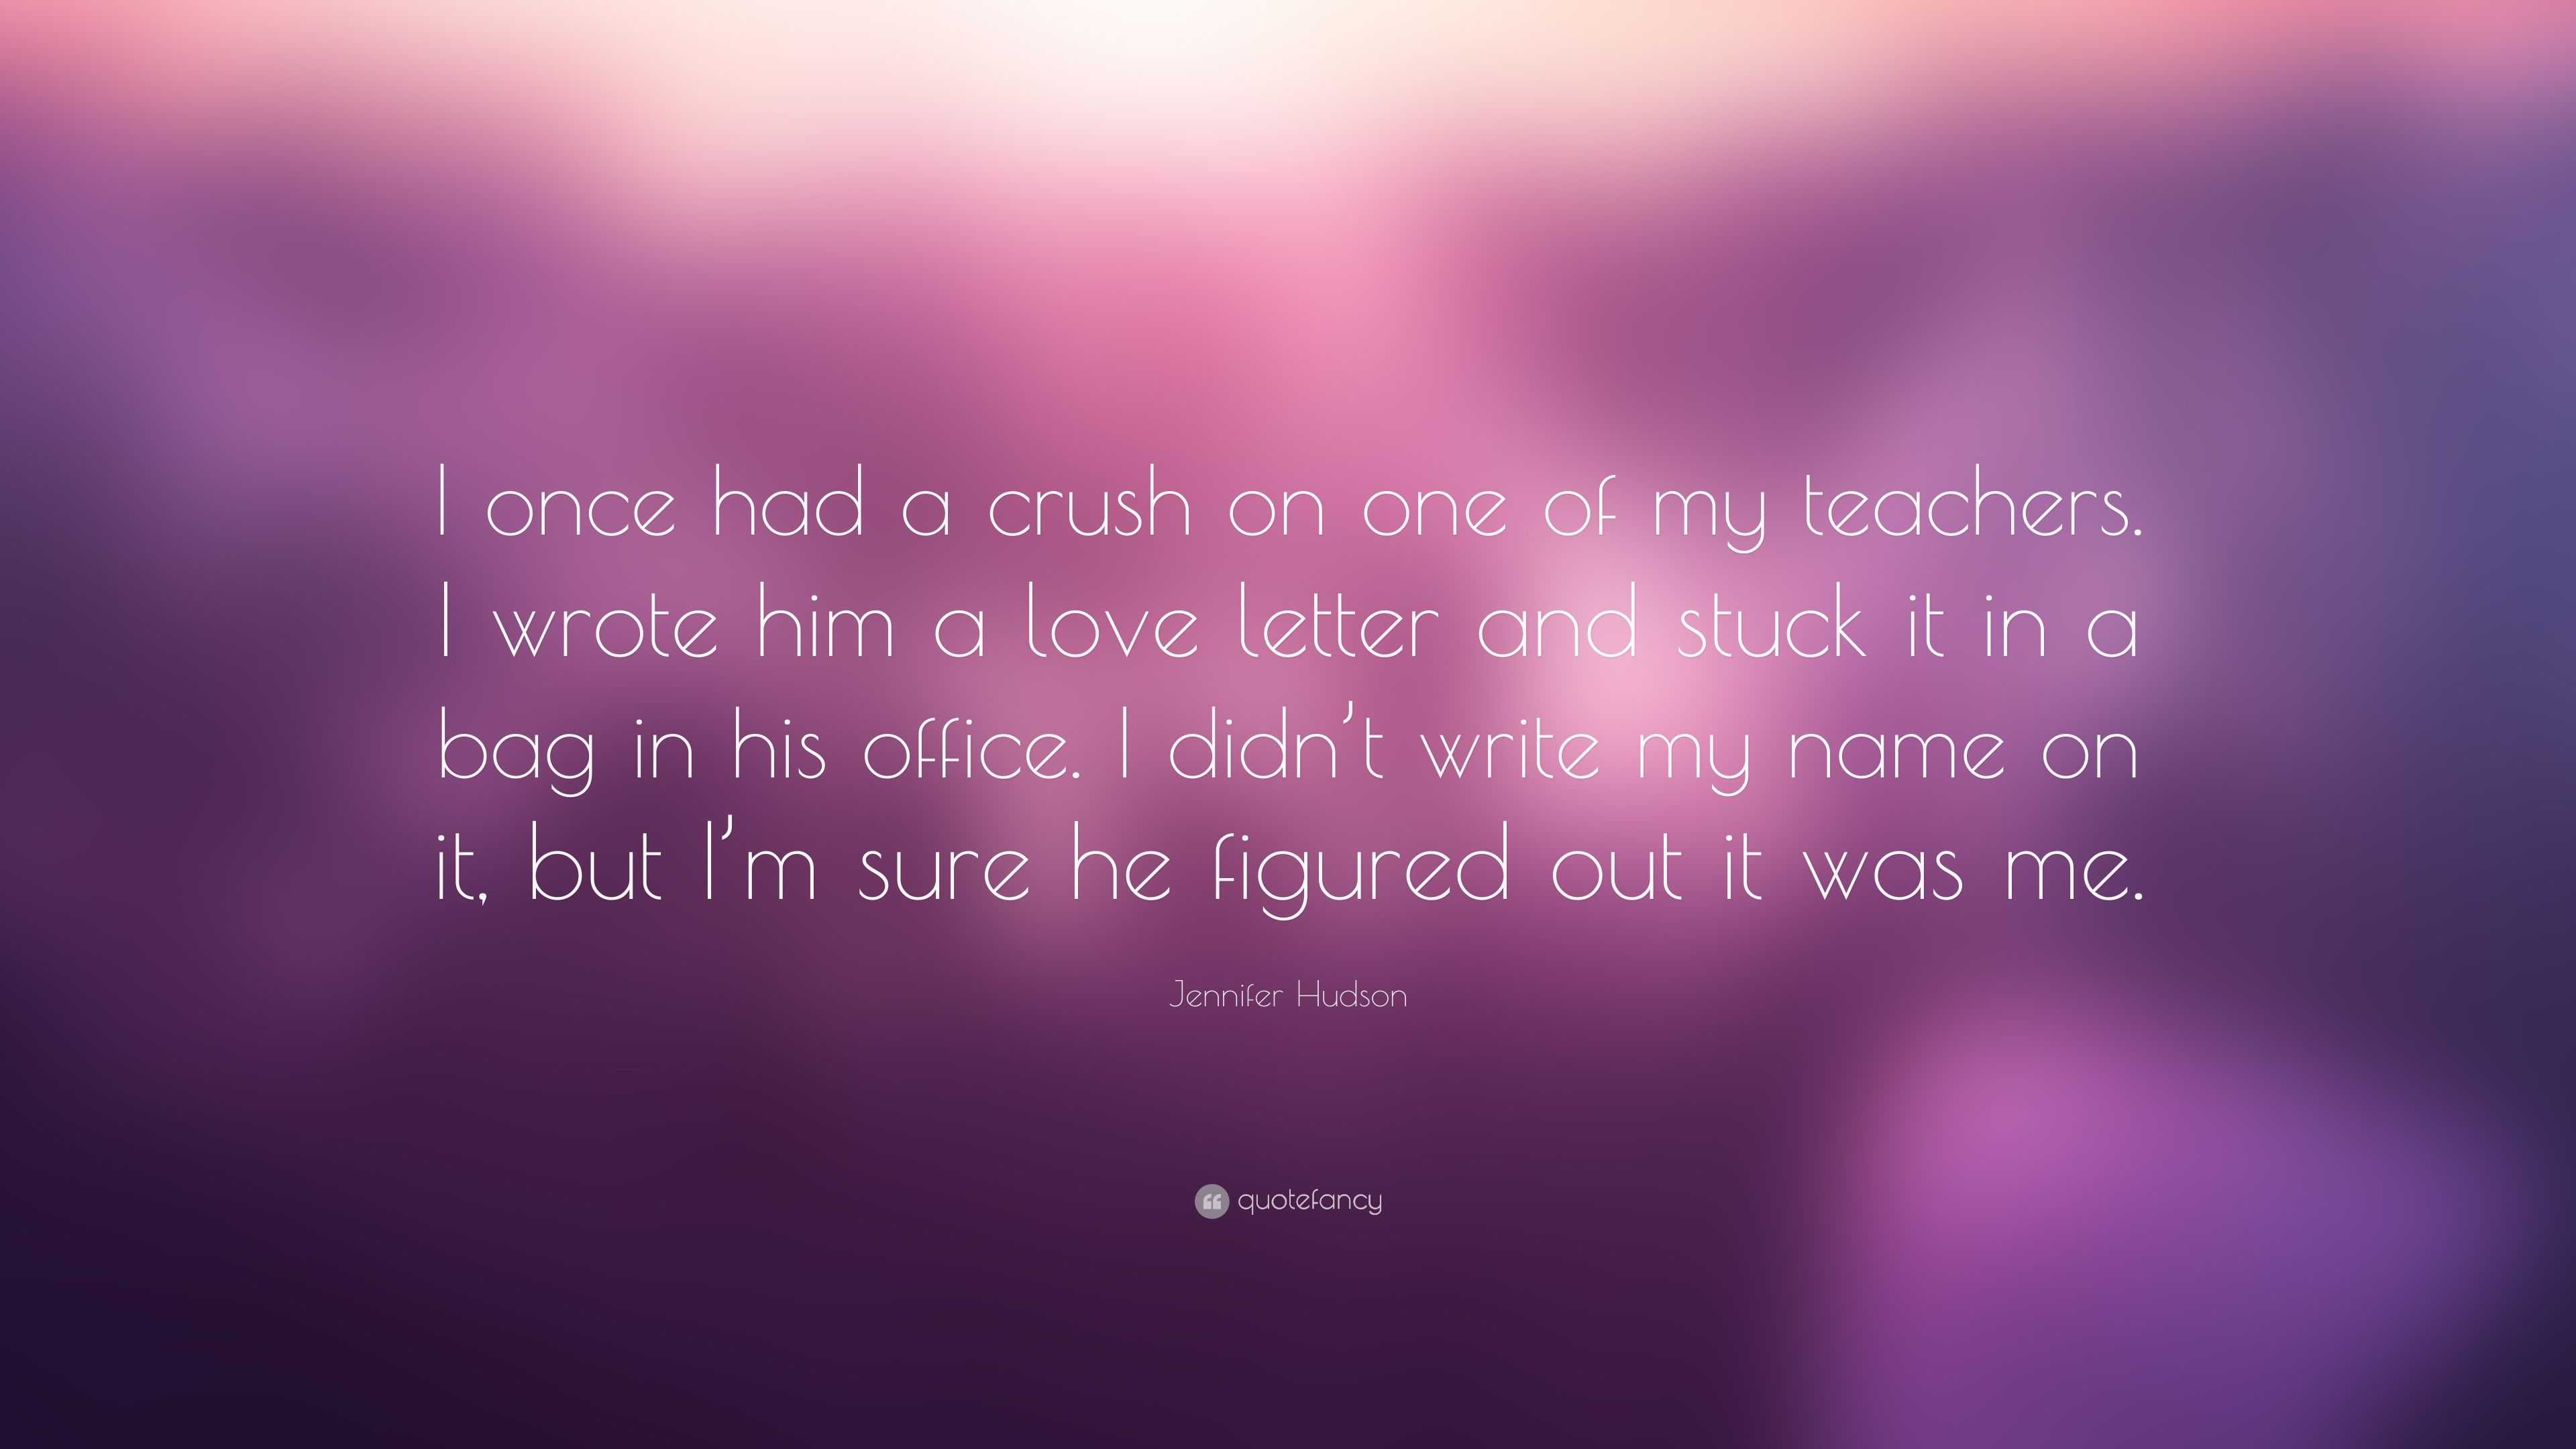 Jennifer Hudson Quote: “I once had a crush on one of my teachers. I wrote  him a love letter and stuck it in a bag in his office. I didn't write ...”